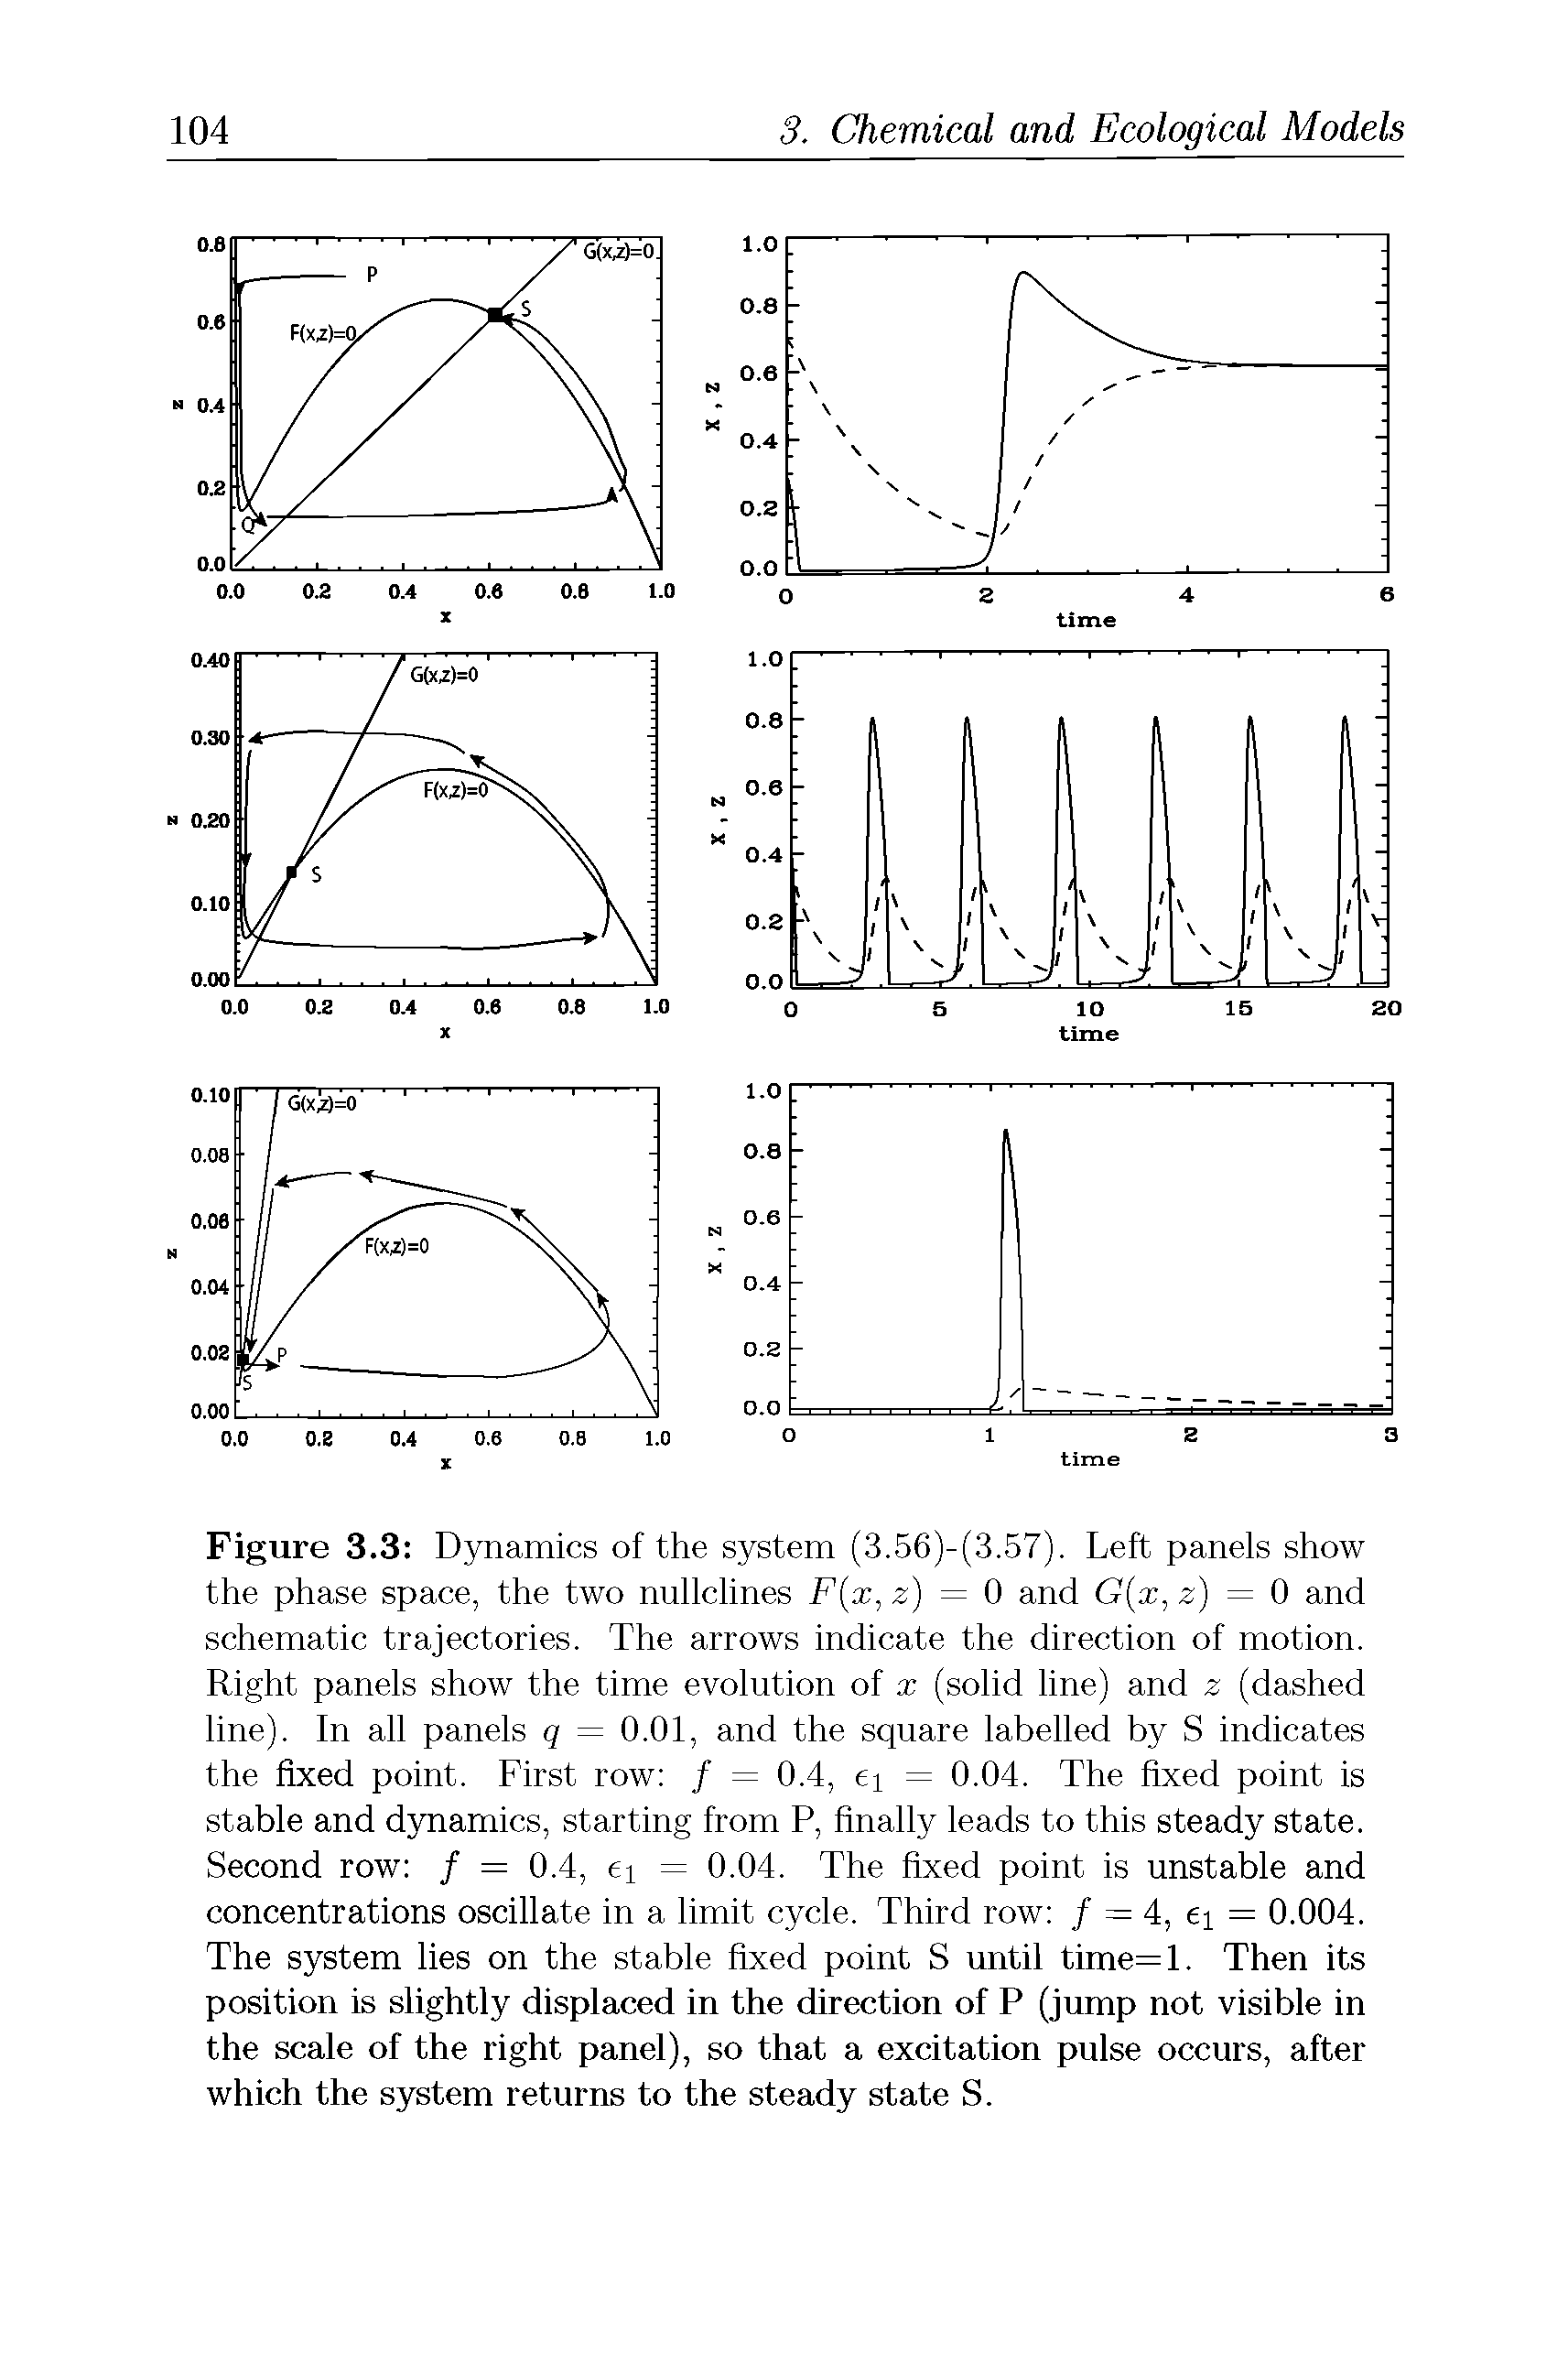 Figure 3.3 Dynamics of the system (3.56)-(3.57). Left panels show the phase space, the two nullclines F(x,z) = 0 and G(x,z) = 0 and schematic trajectories. The arrows indicate the direction of motion. Right panels show the time evolution of x (solid line) and z (dashed line). In all panels q = 0.01, and the square labelled by S indicates the fixed point. First row / = 0.4, ei = 0.04. The fixed point is stable and dynamics, starting from P, finally leads to this steady state. Second row / = 0.4, ei = 0.04. The fixed point is unstable and concentrations oscillate in a limit cycle. Third row / = 4, ei = 0.004. The system lies on the stable fixed point S until time=l. Then its position is slightly displaced in the direction of P (jump not visible in the scale of the right panel), so that a excitation pulse occurs, after which the system returns to the steady state S.